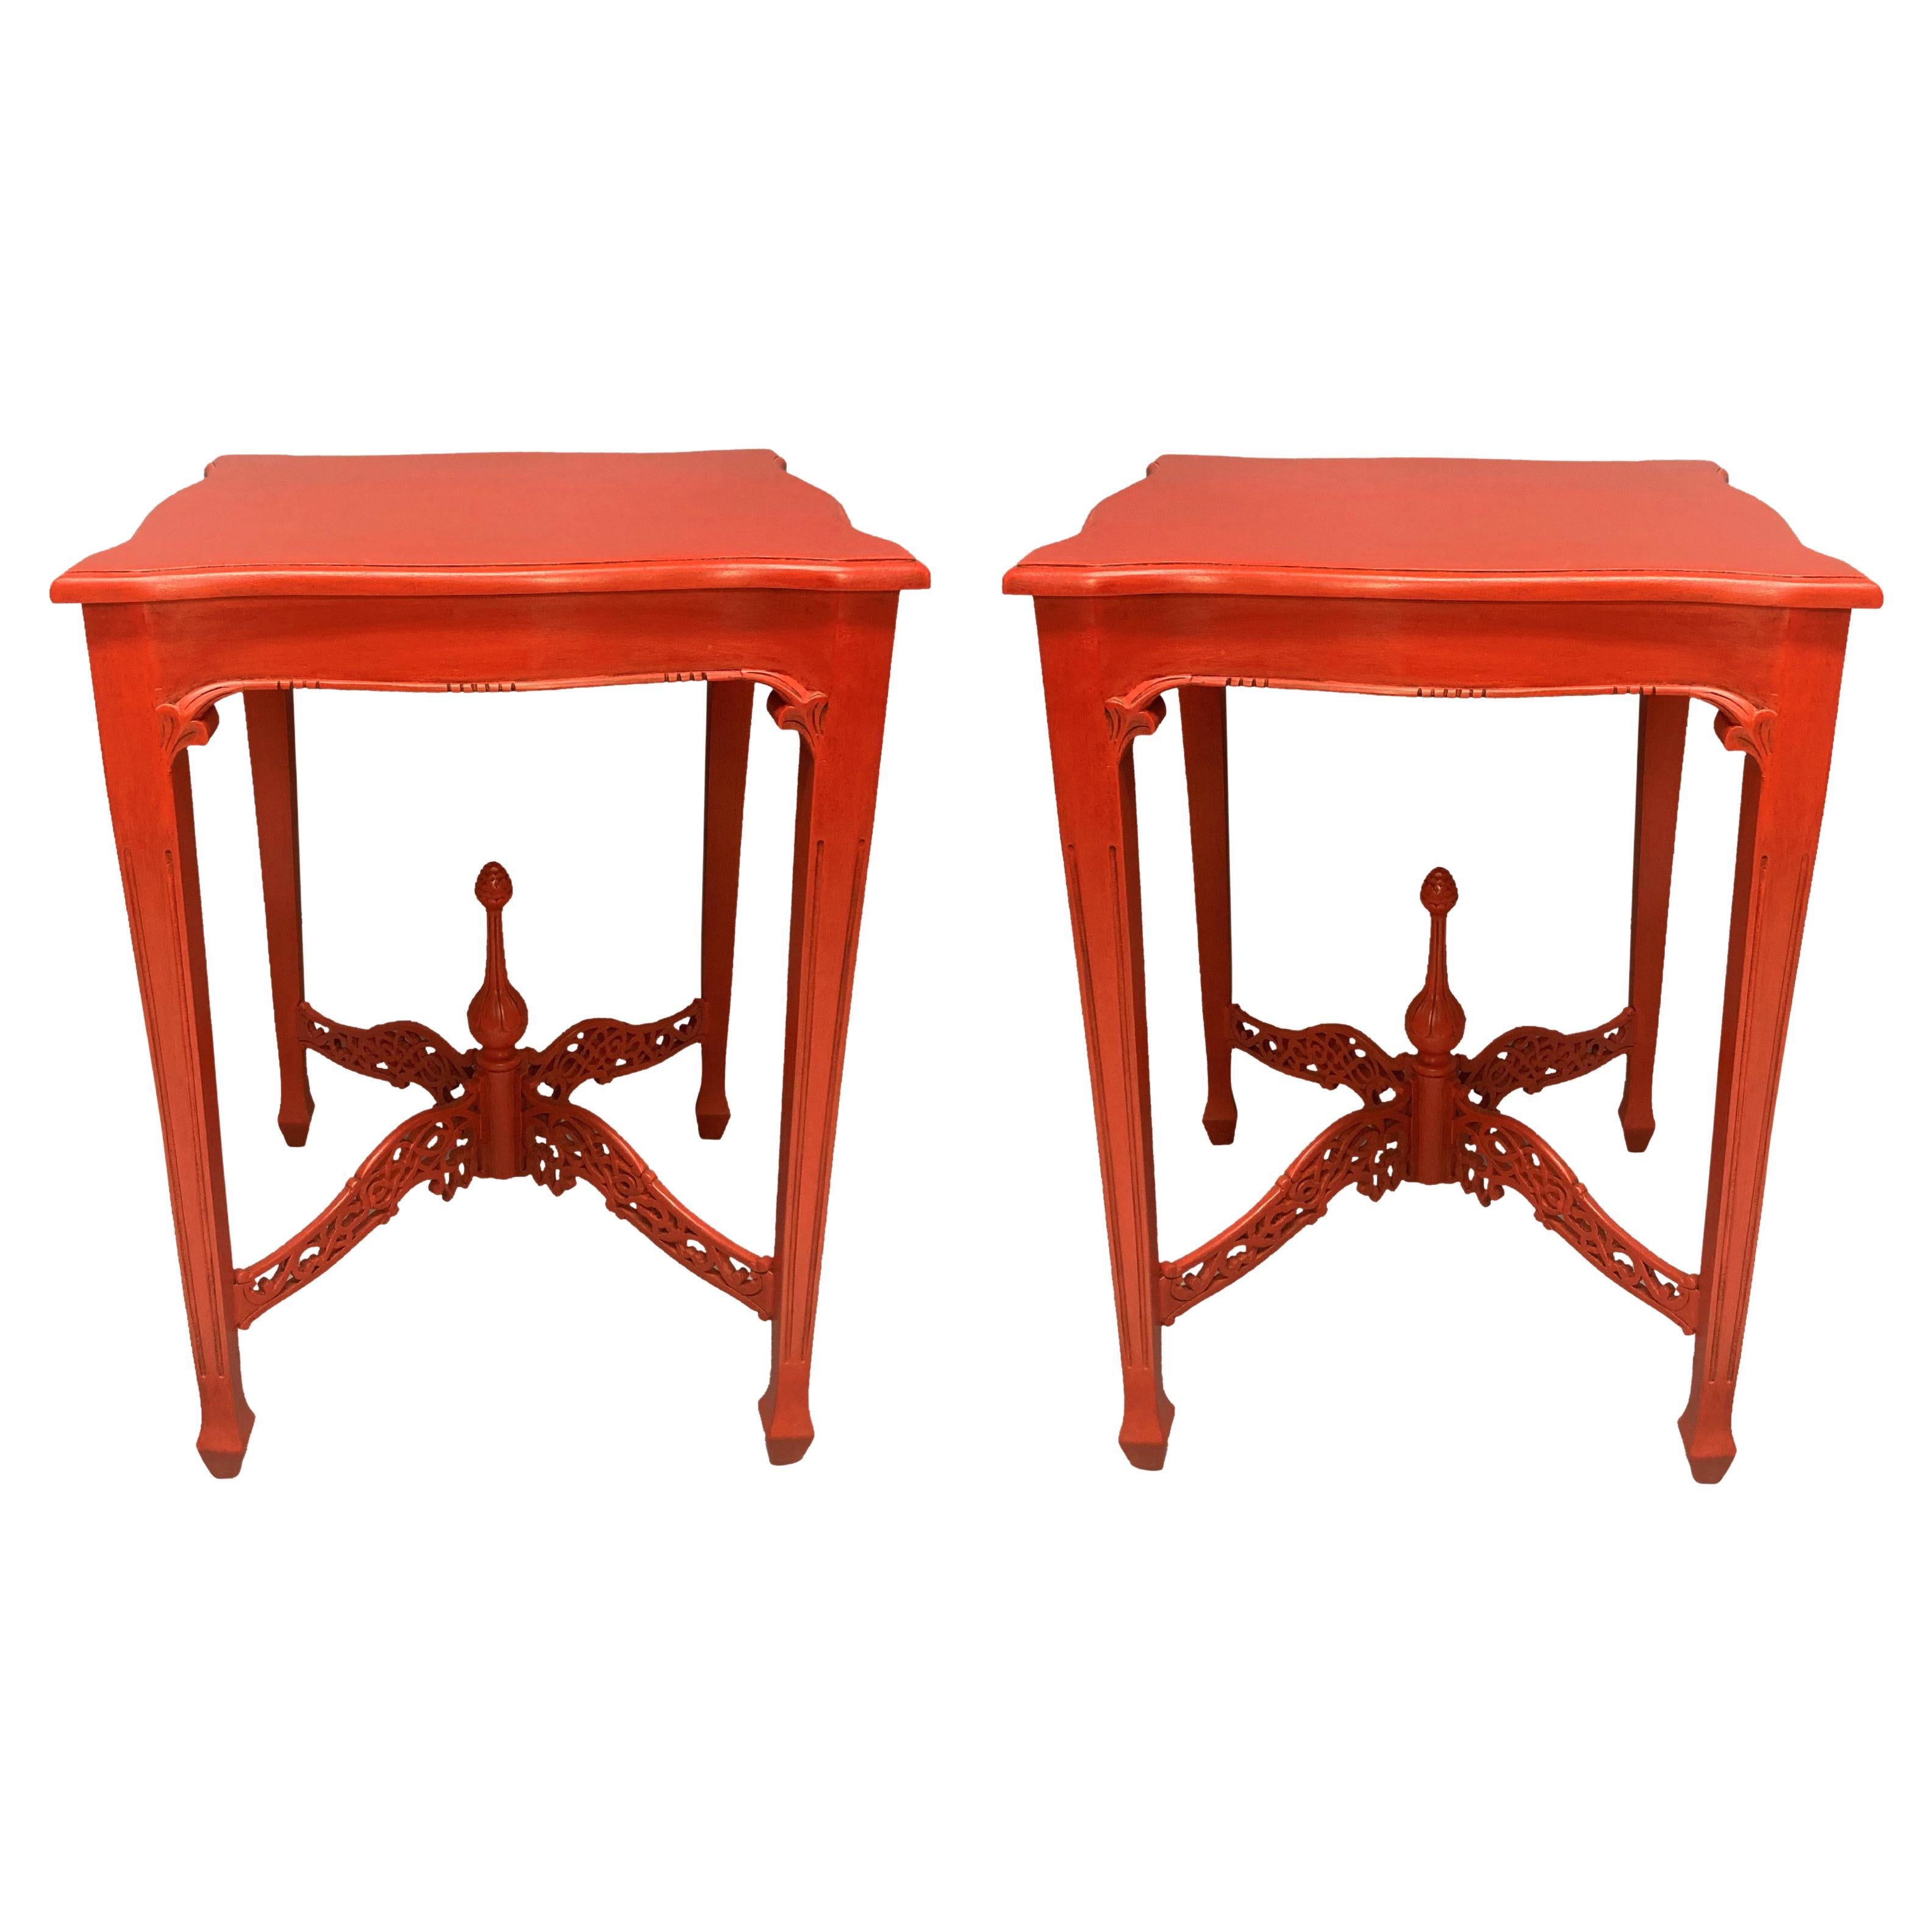 Pair Of Scarlet Chippendale Style Side Tables